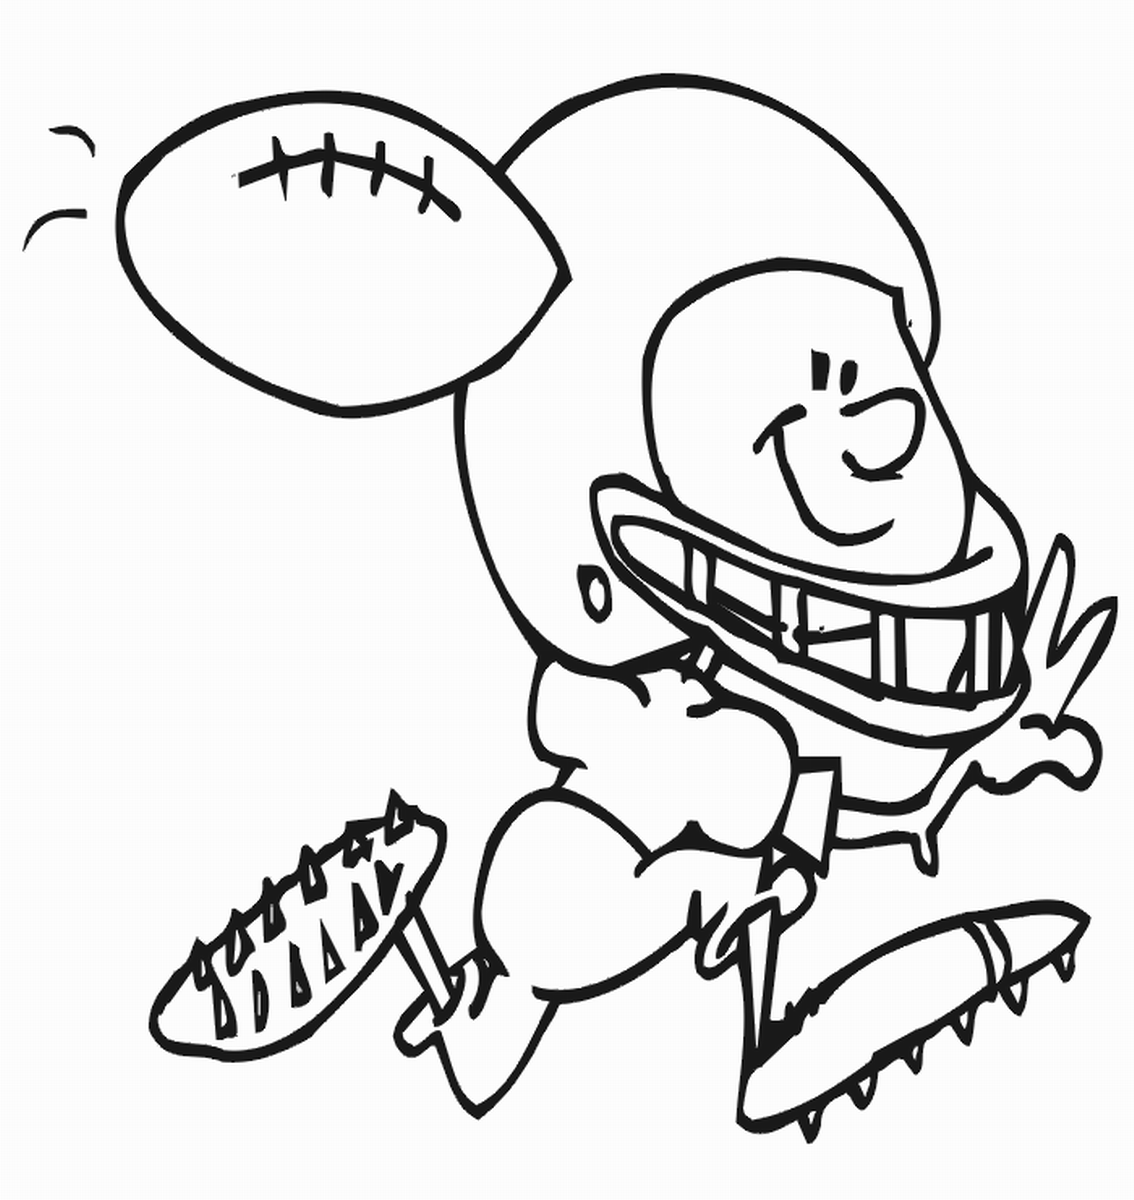 Free Printable Football Coloring Pages for Kids Best Coloring Pages